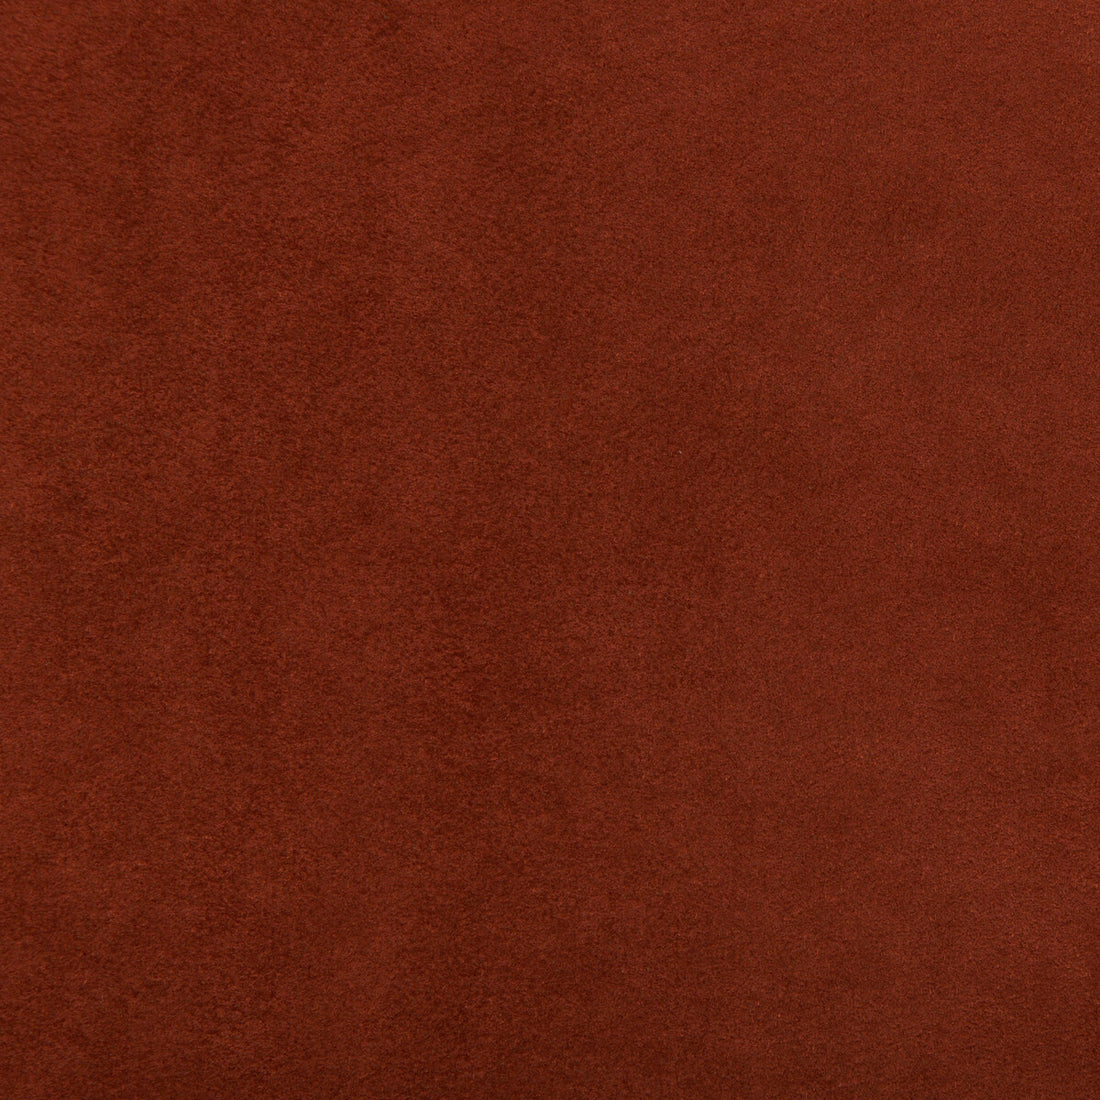 Ultimate fabric in henna color - pattern 960122.240.0 - by Lee Jofa in the Ultimate Suede collection